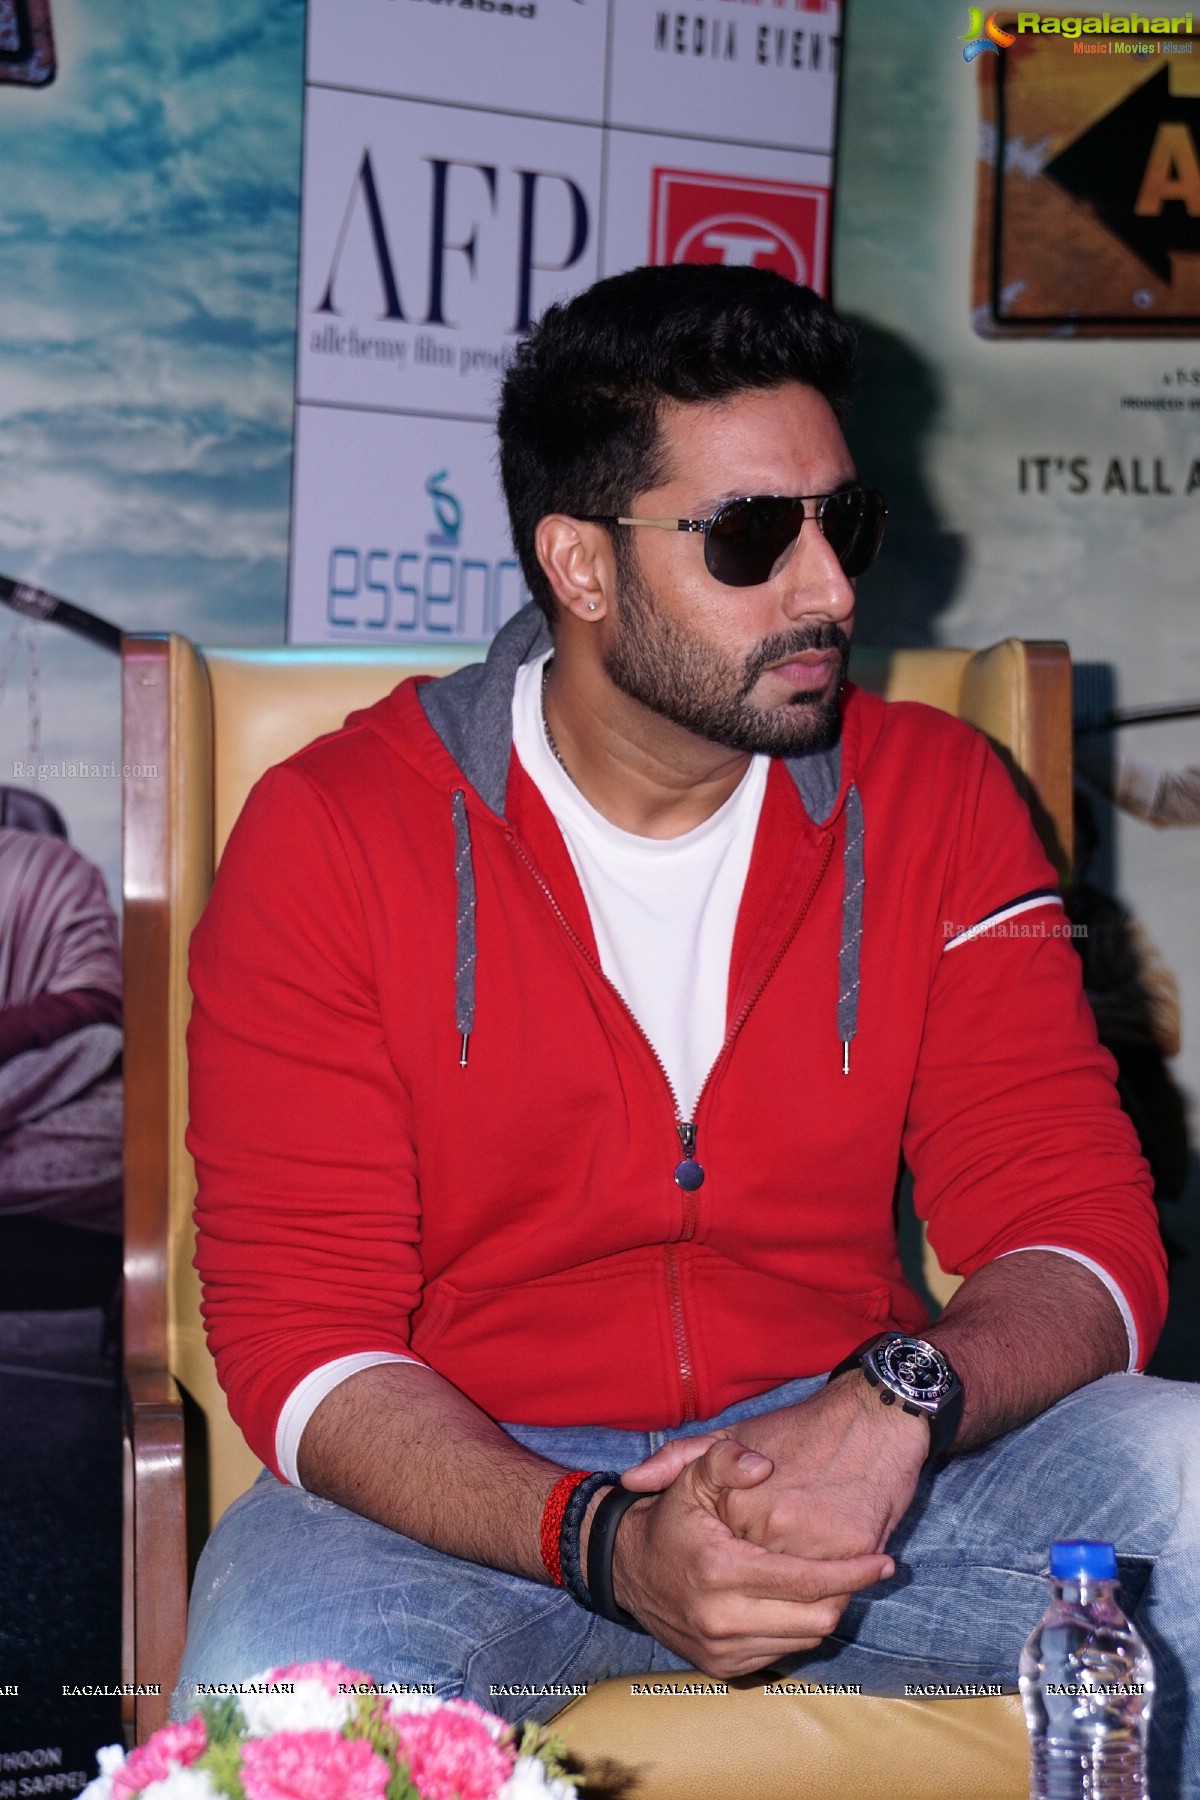 Abhishek Bachchan's All Is Well Movie Promotions at Hyderabad